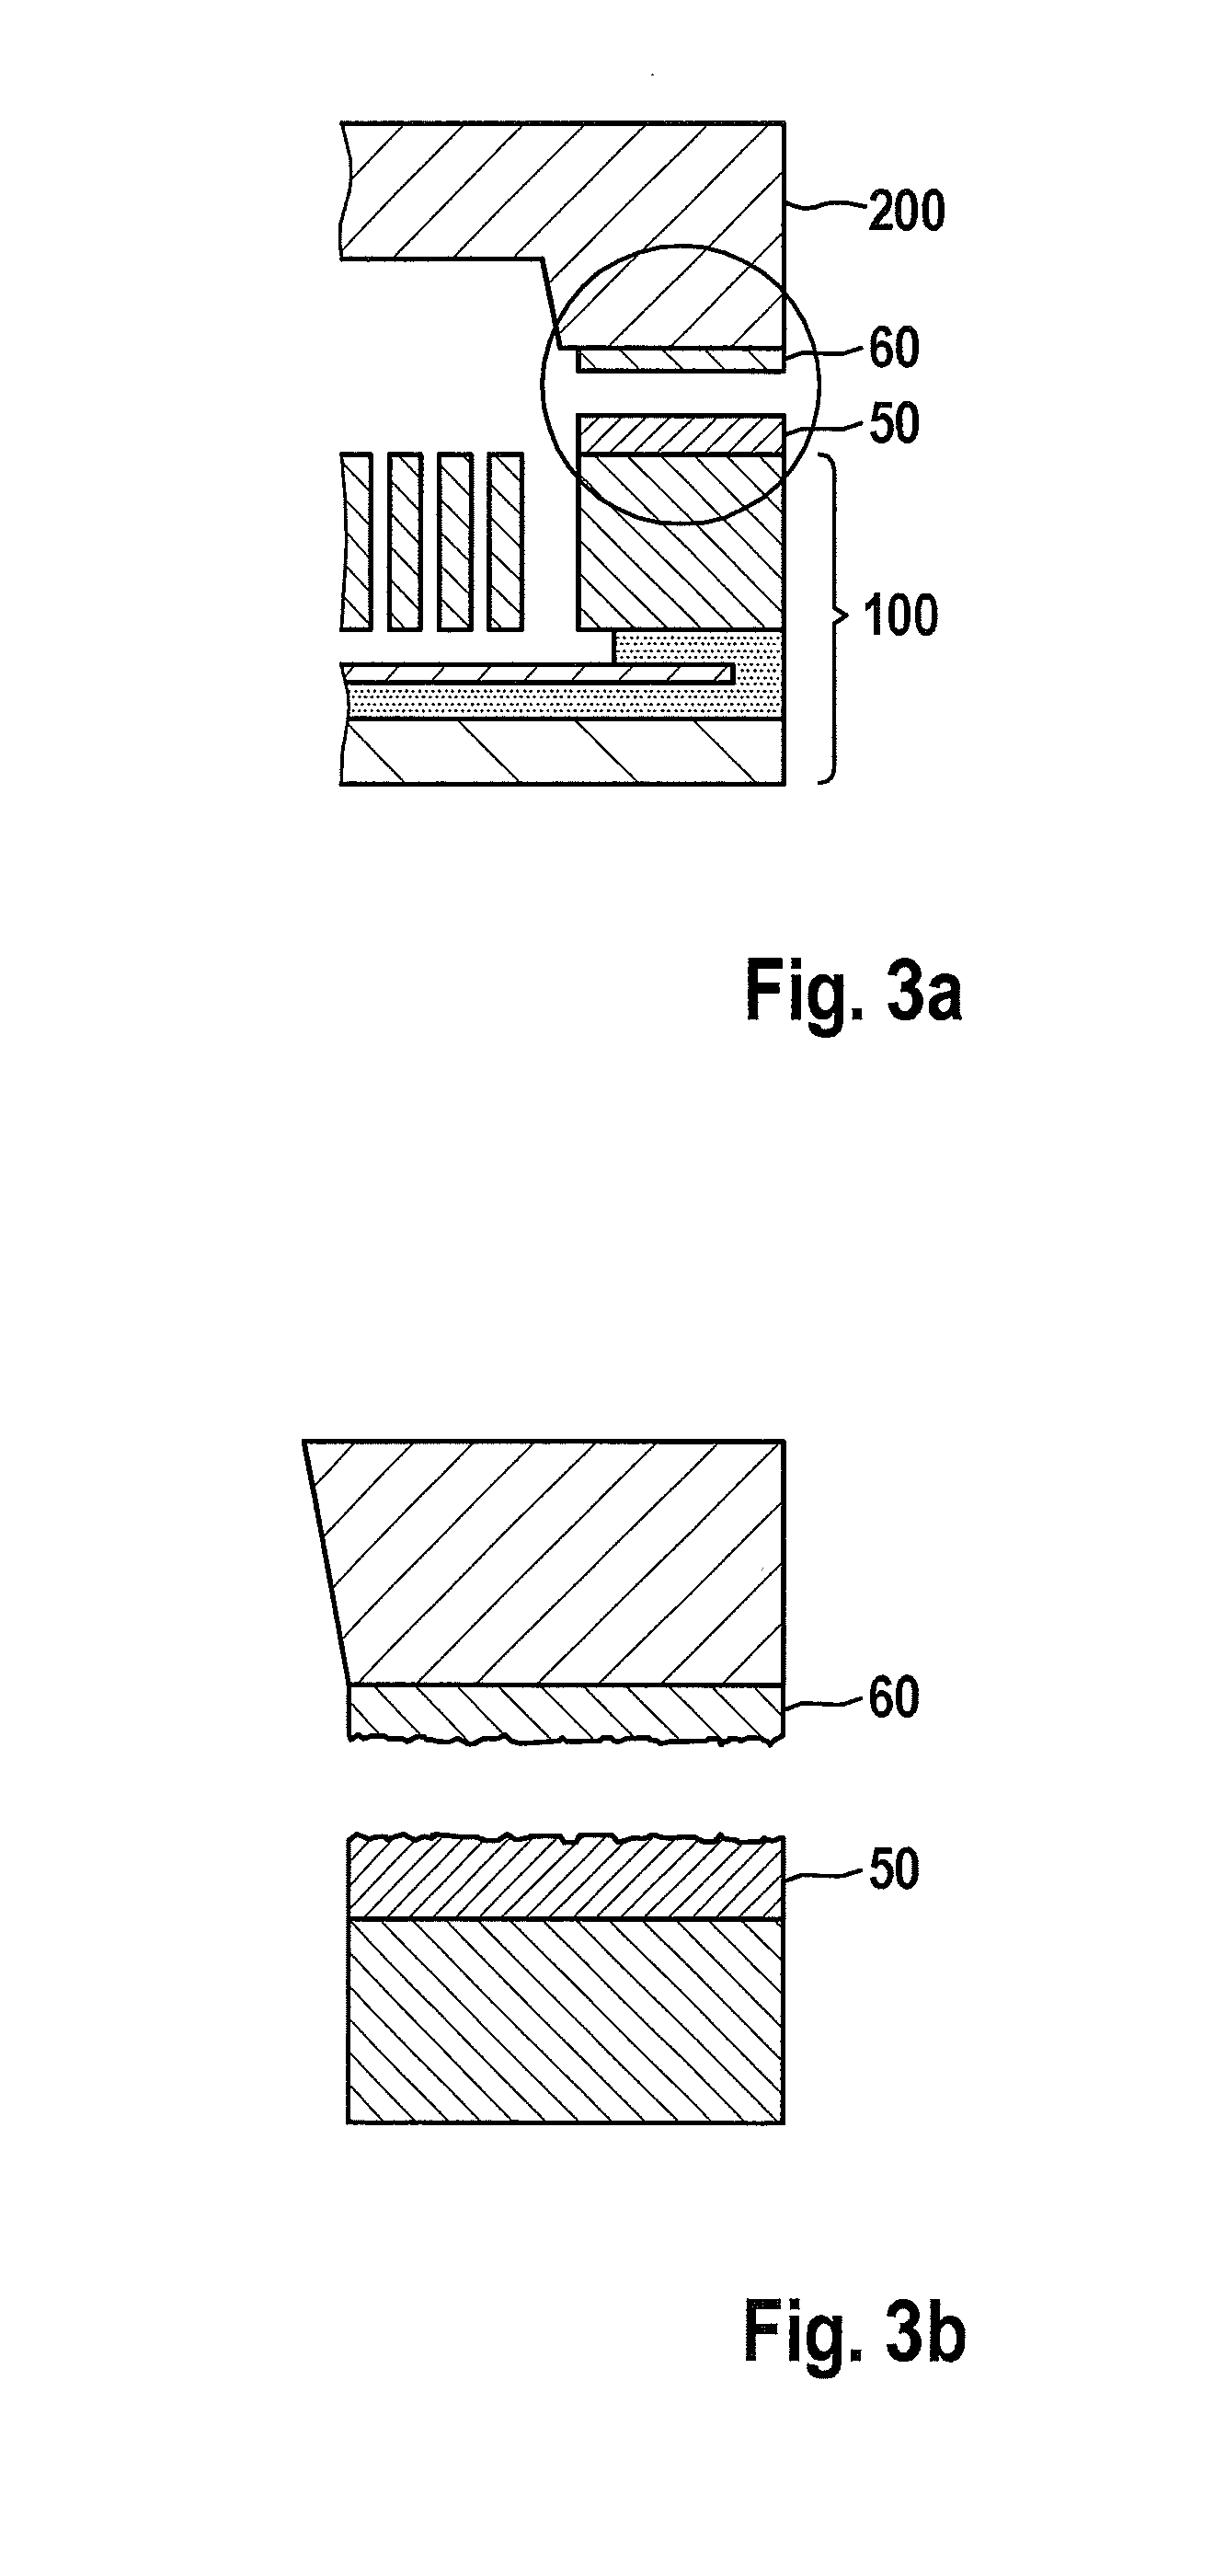 Method for eutectic bonding of two carrier devices